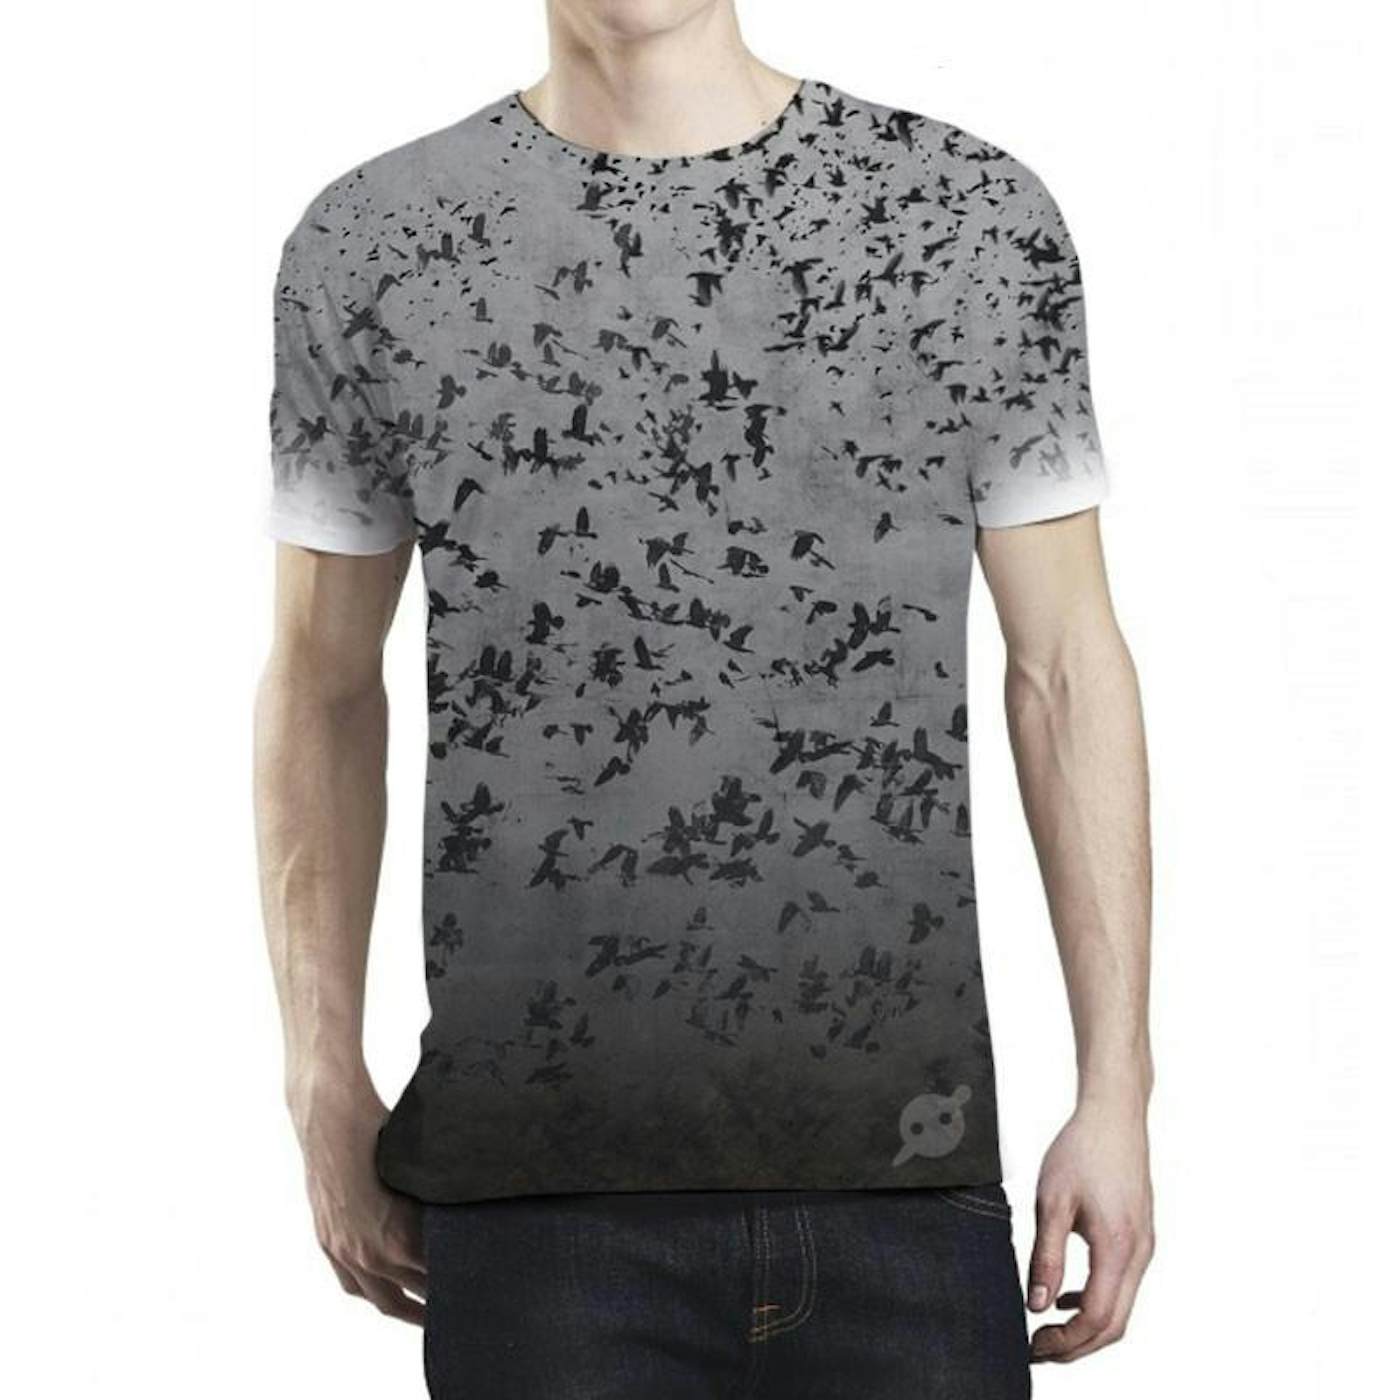 Knife Party All Over Crows T-Shirt